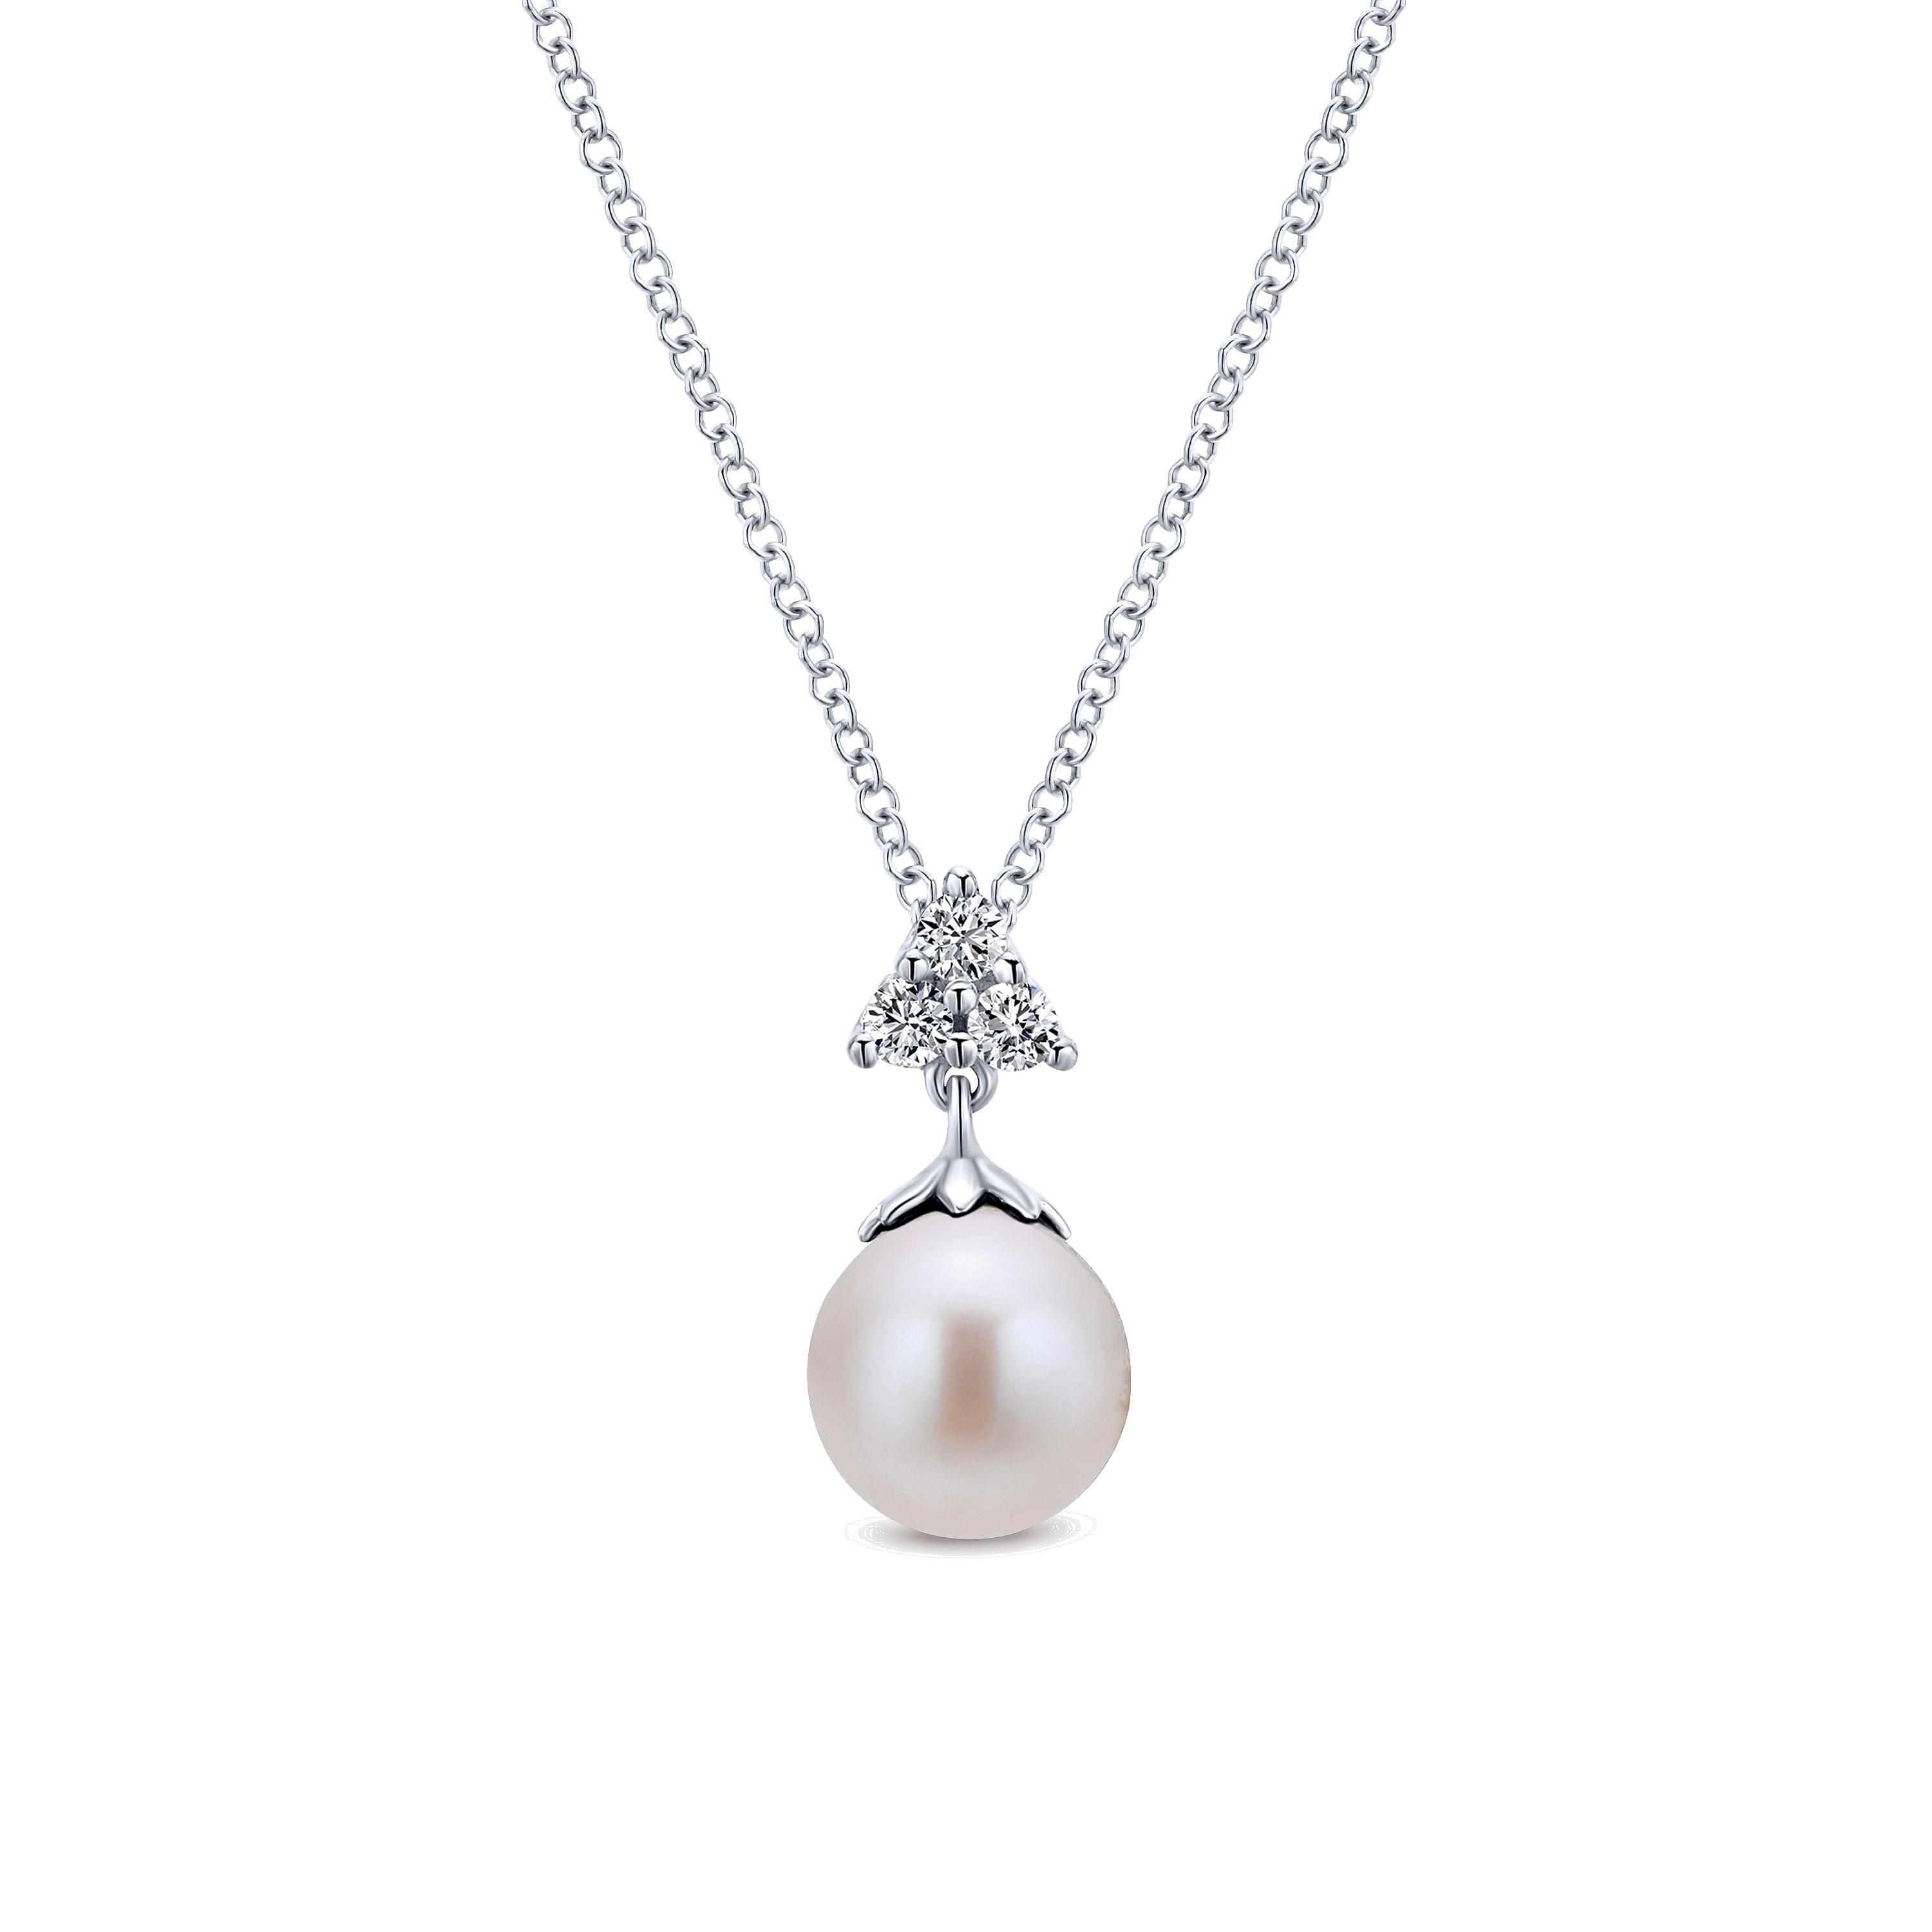 Gabriel - 14K White Gold Cultured Pearl Drop Necklace with Diamond Accent